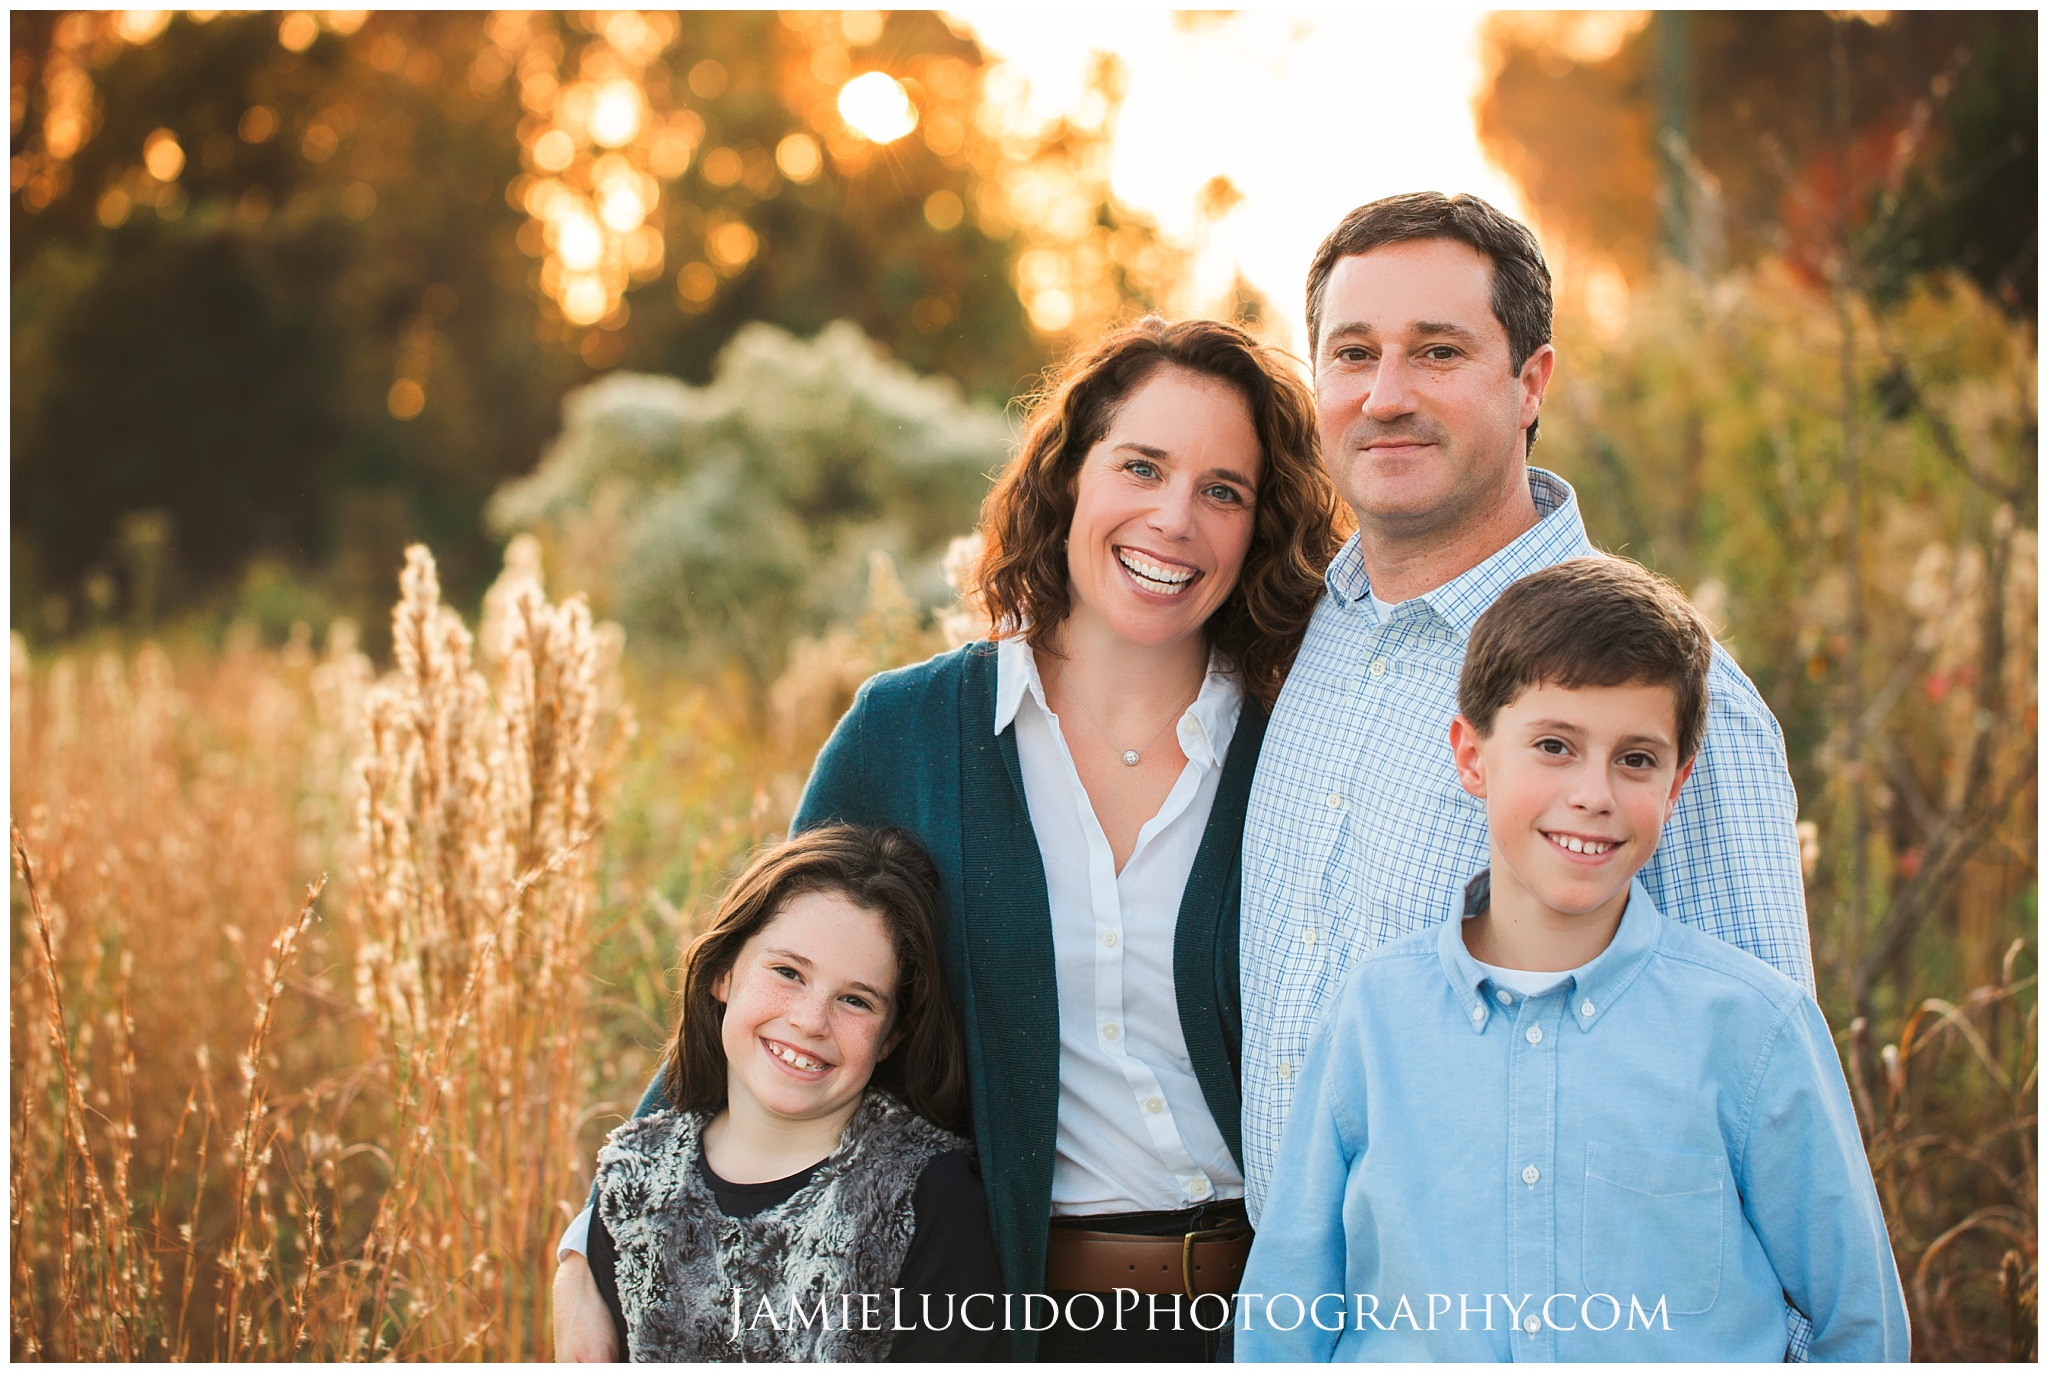 field of gold, goldenburgs, fall family photos, fall family photographer, sunset photography, charlotte photographer jamie lucido, jamie lucido family photographer, natural light, sunset light, what to wear, blue and gold